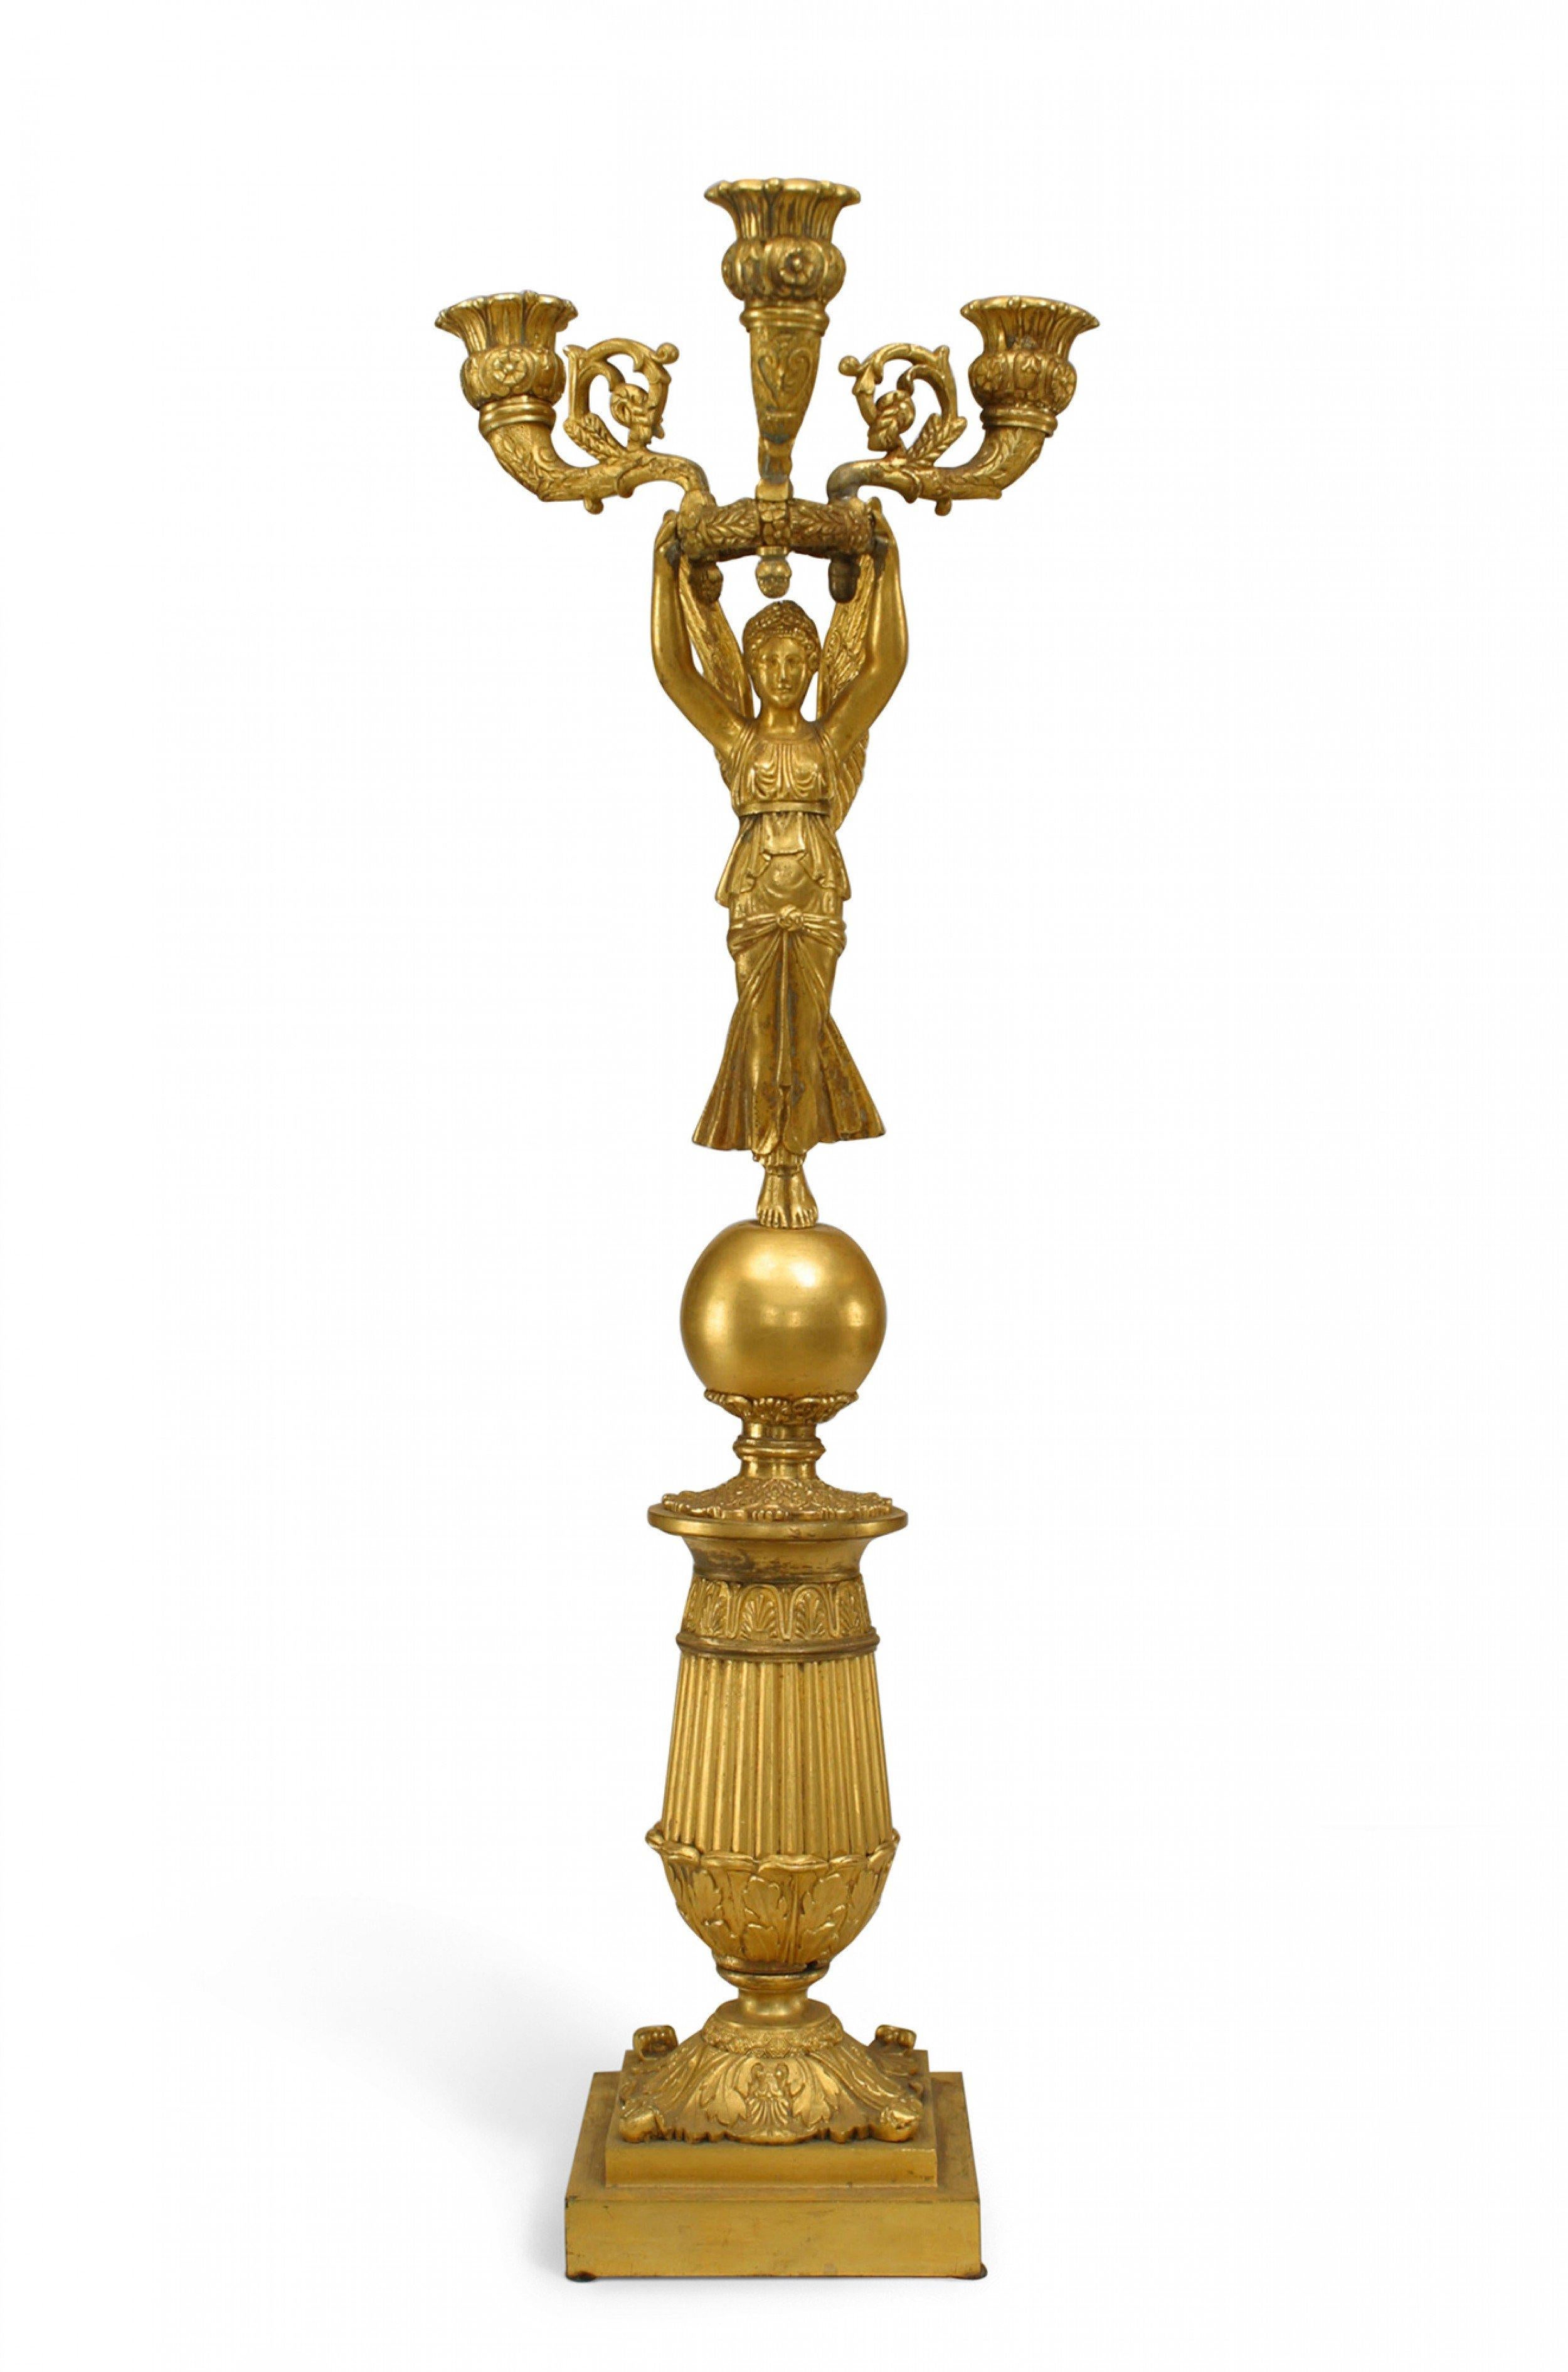 Pair of French Empire-style (19th Century) bronze dore 3 arm candelabras supported by winged figures (PRICED AS PAIR).
 